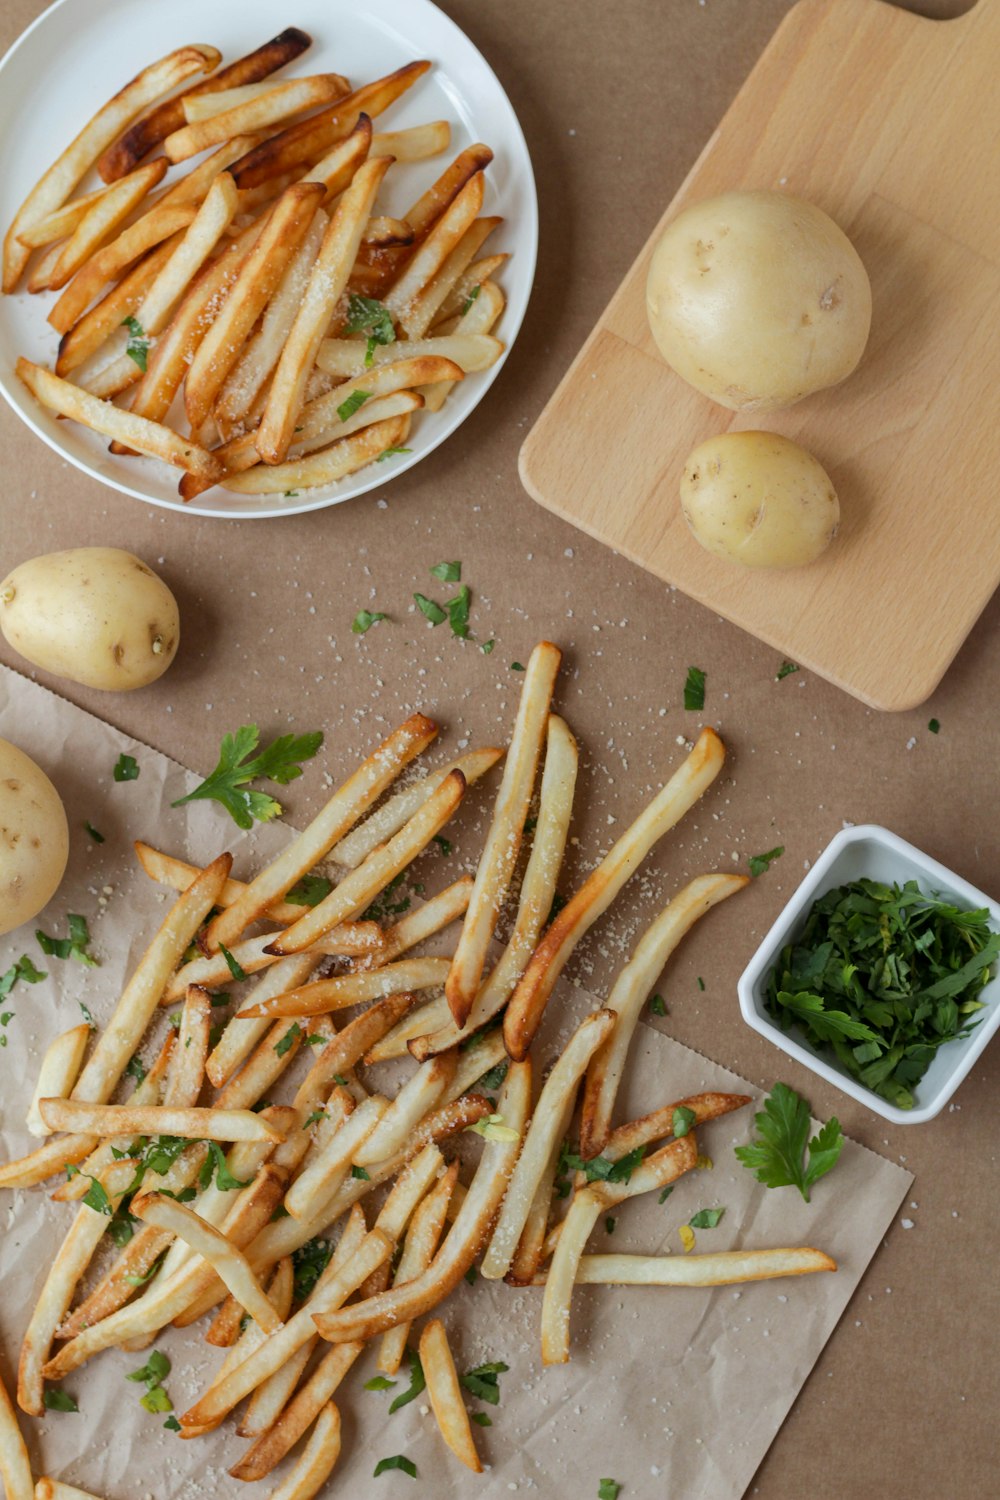 potato fries and sliced of vegetables on white ceramic plate